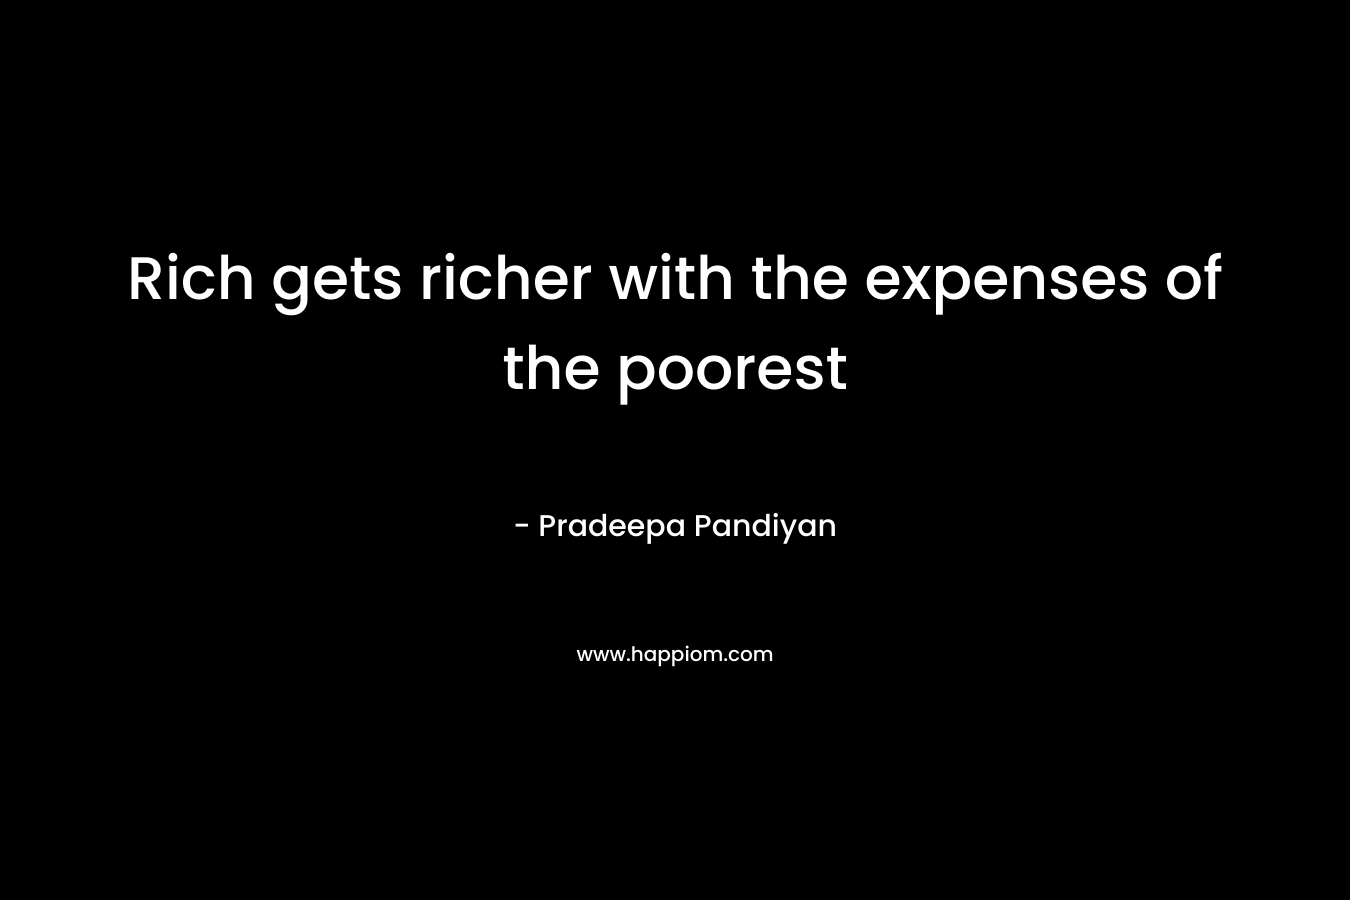 Rich gets richer with the expenses of the poorest